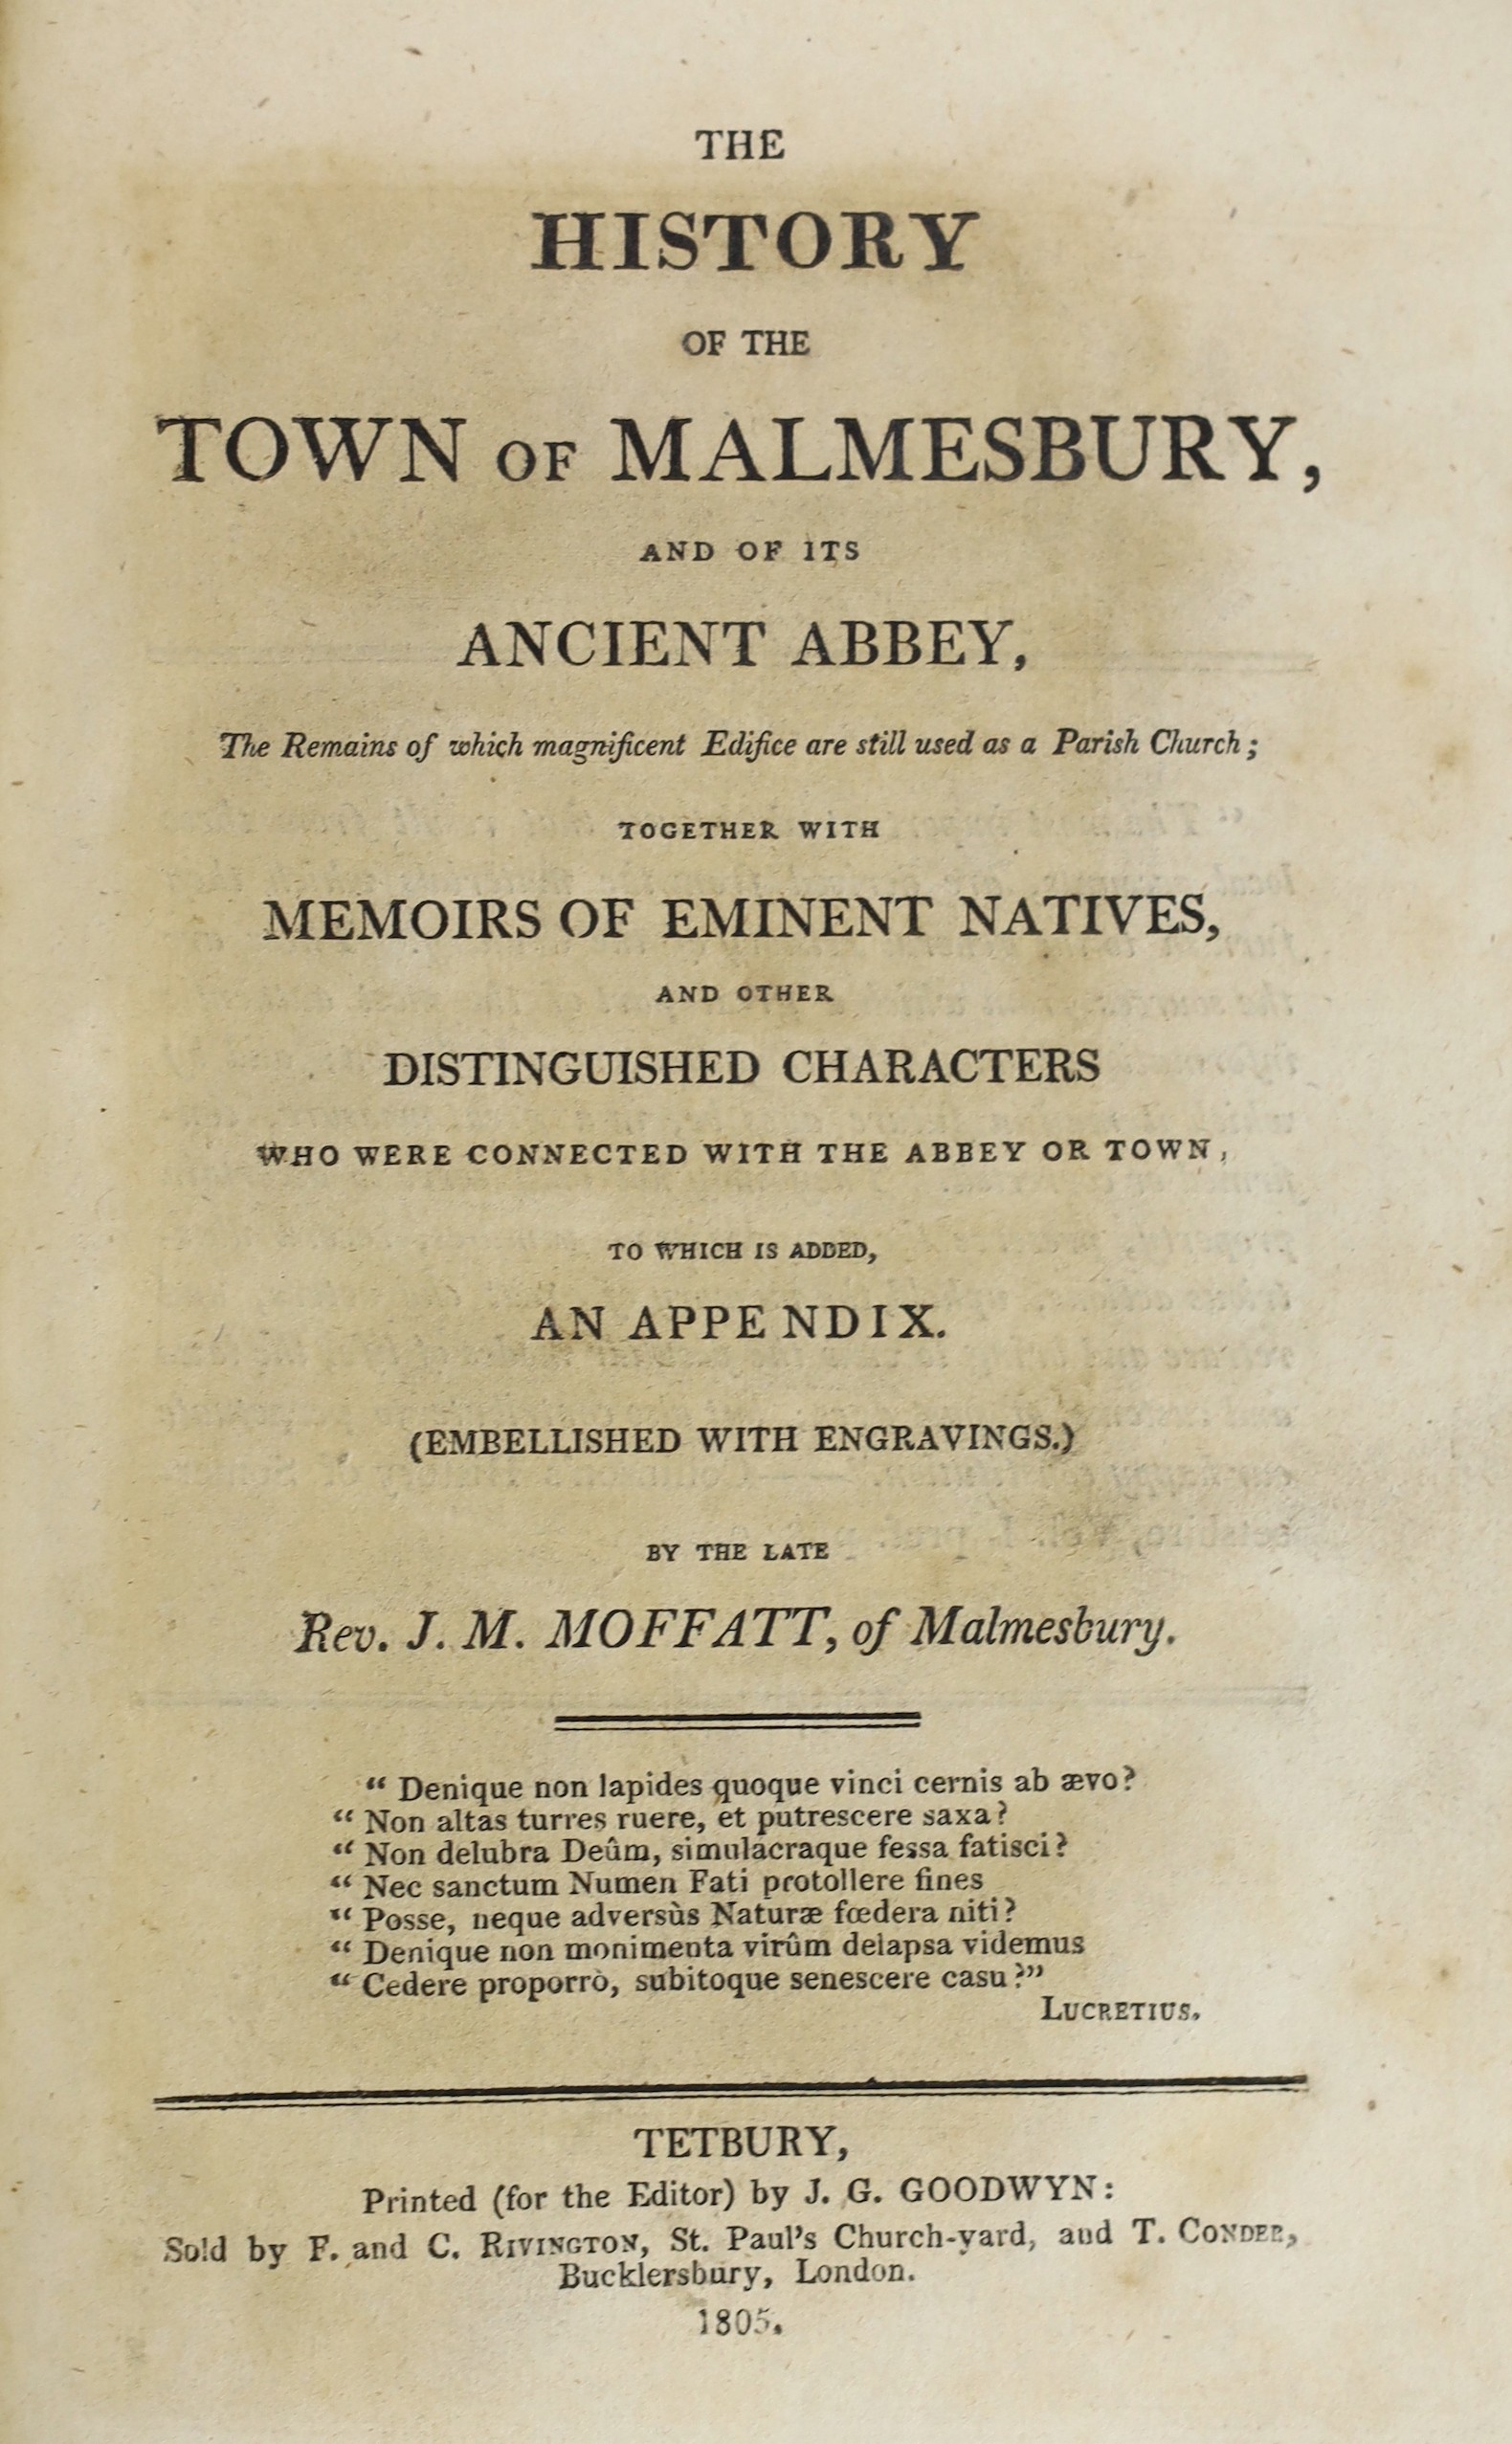 WILTS: Moffat, Rev.J.M. (editor) - The History of the Town of Malmesbury, and of its Ancient Abbey ... 3 plates, a plan and folded table, subscribers list; contemp. gilt calf and panelled spine. Tetbury, 1805: 'An Observ